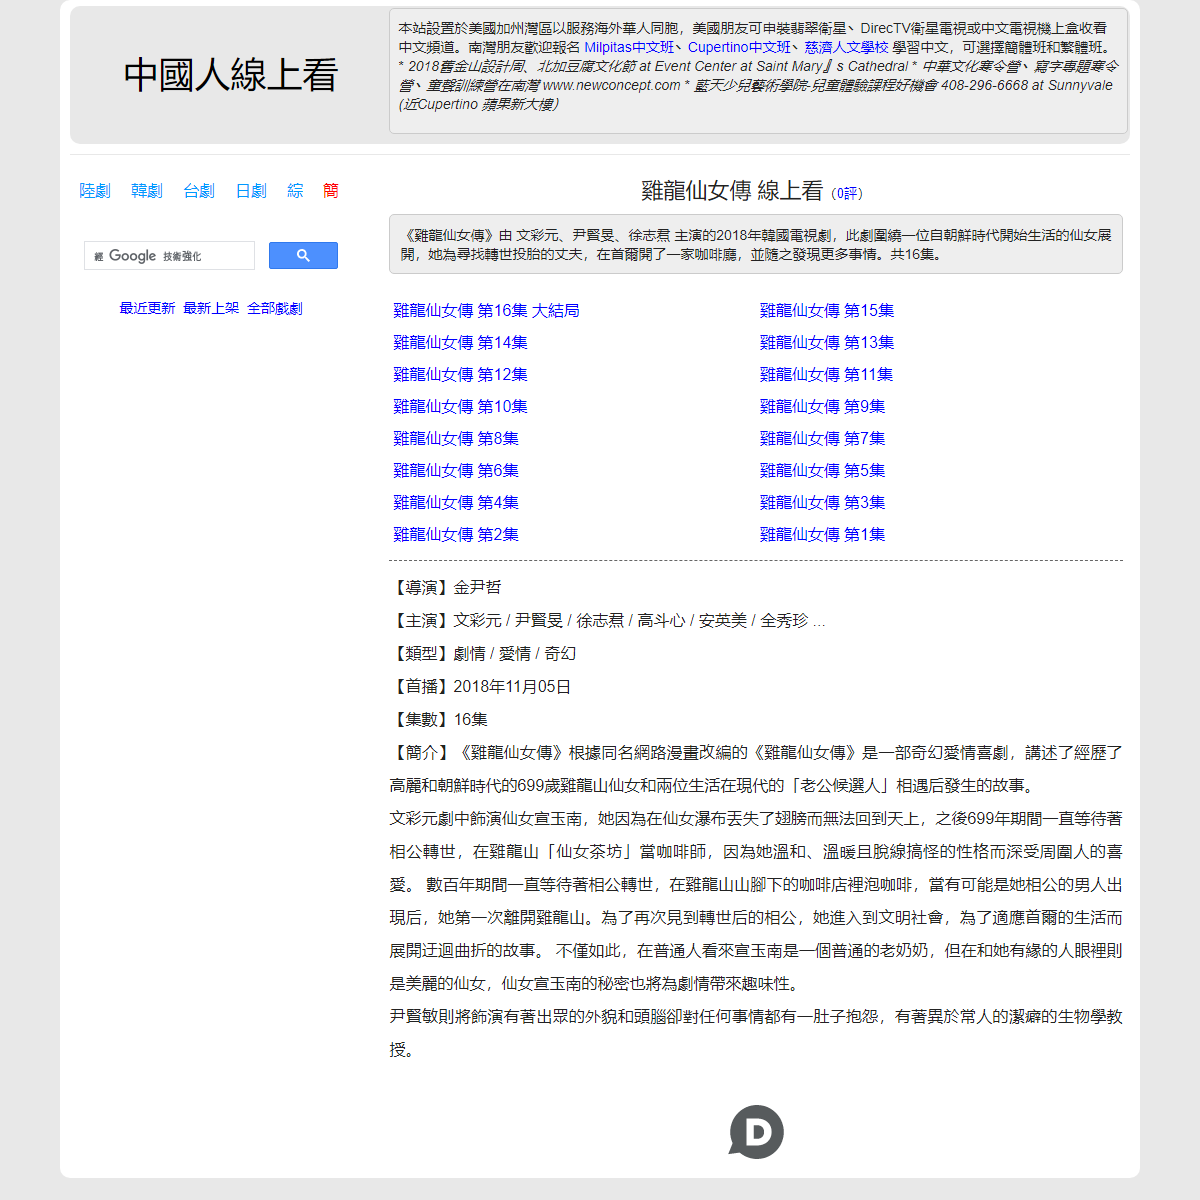 A complete backup of https://chinaq.tv/kr181105b/